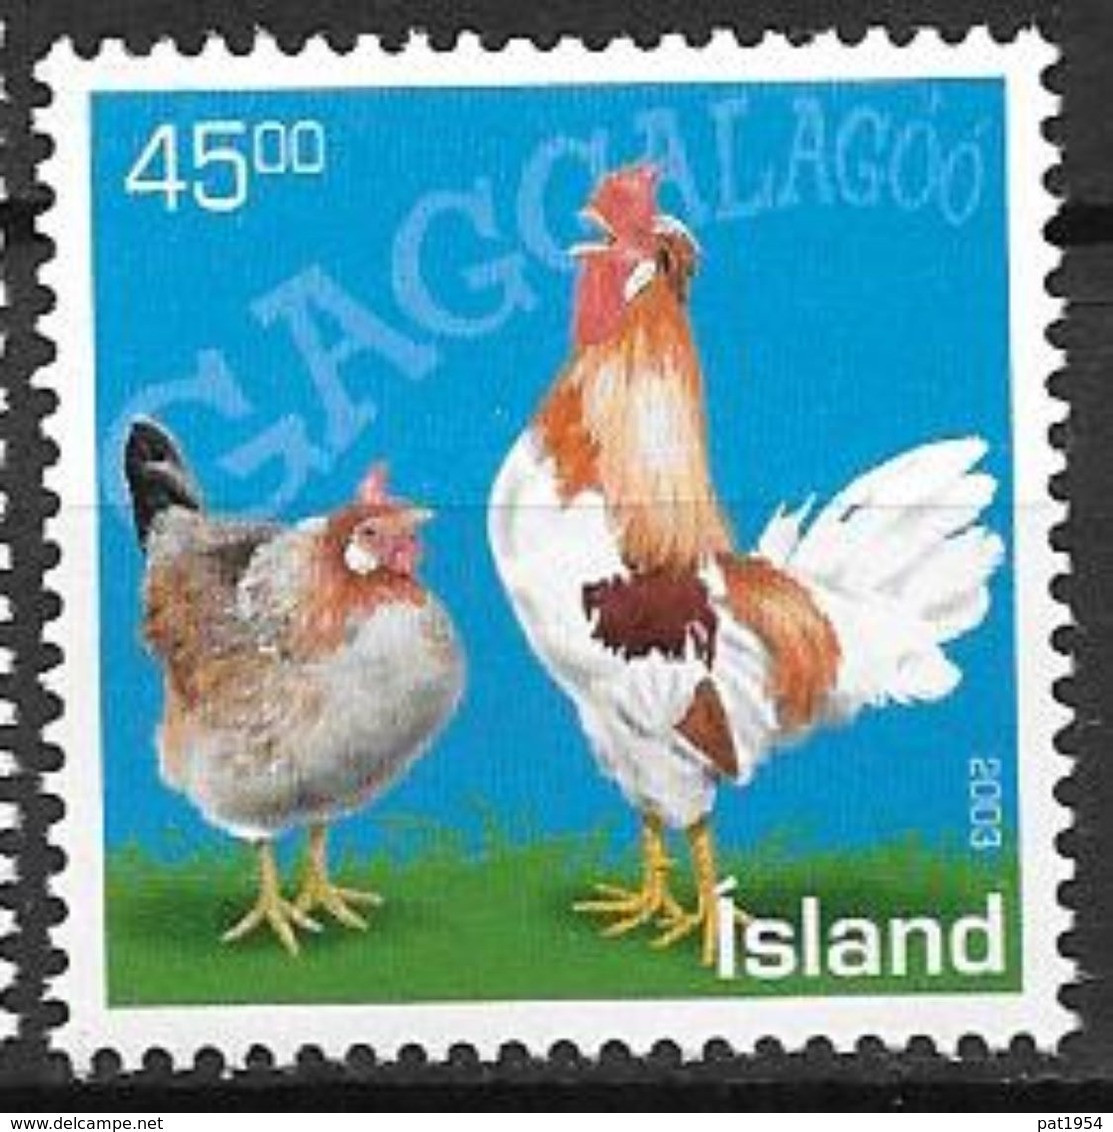 Islande 2003 N°968 Neuf** Animaux Domestiques Poules - Ungebraucht